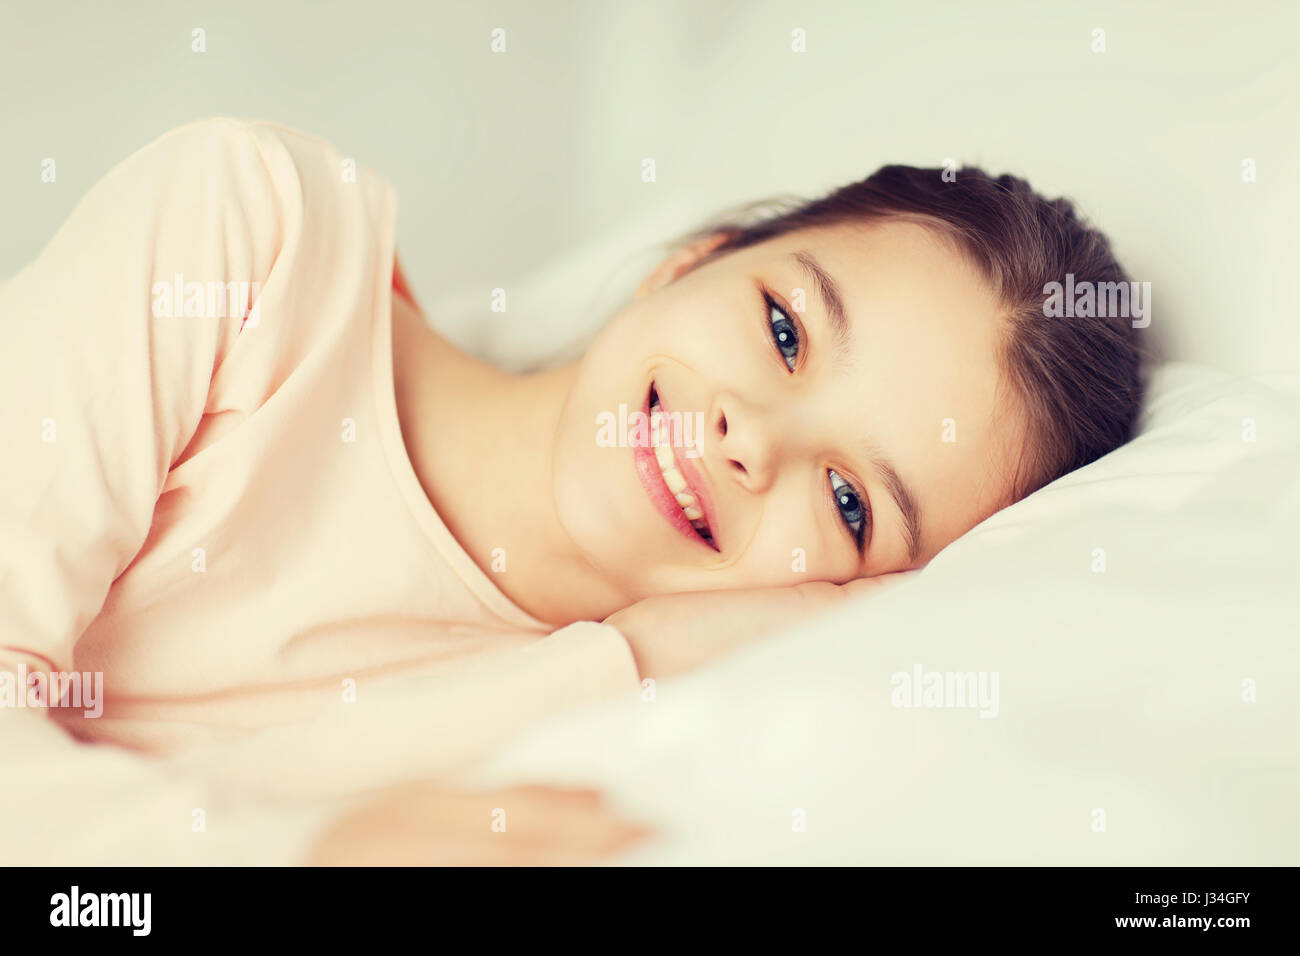 Happy smiling girl lying awake in bed at home Banque D'Images